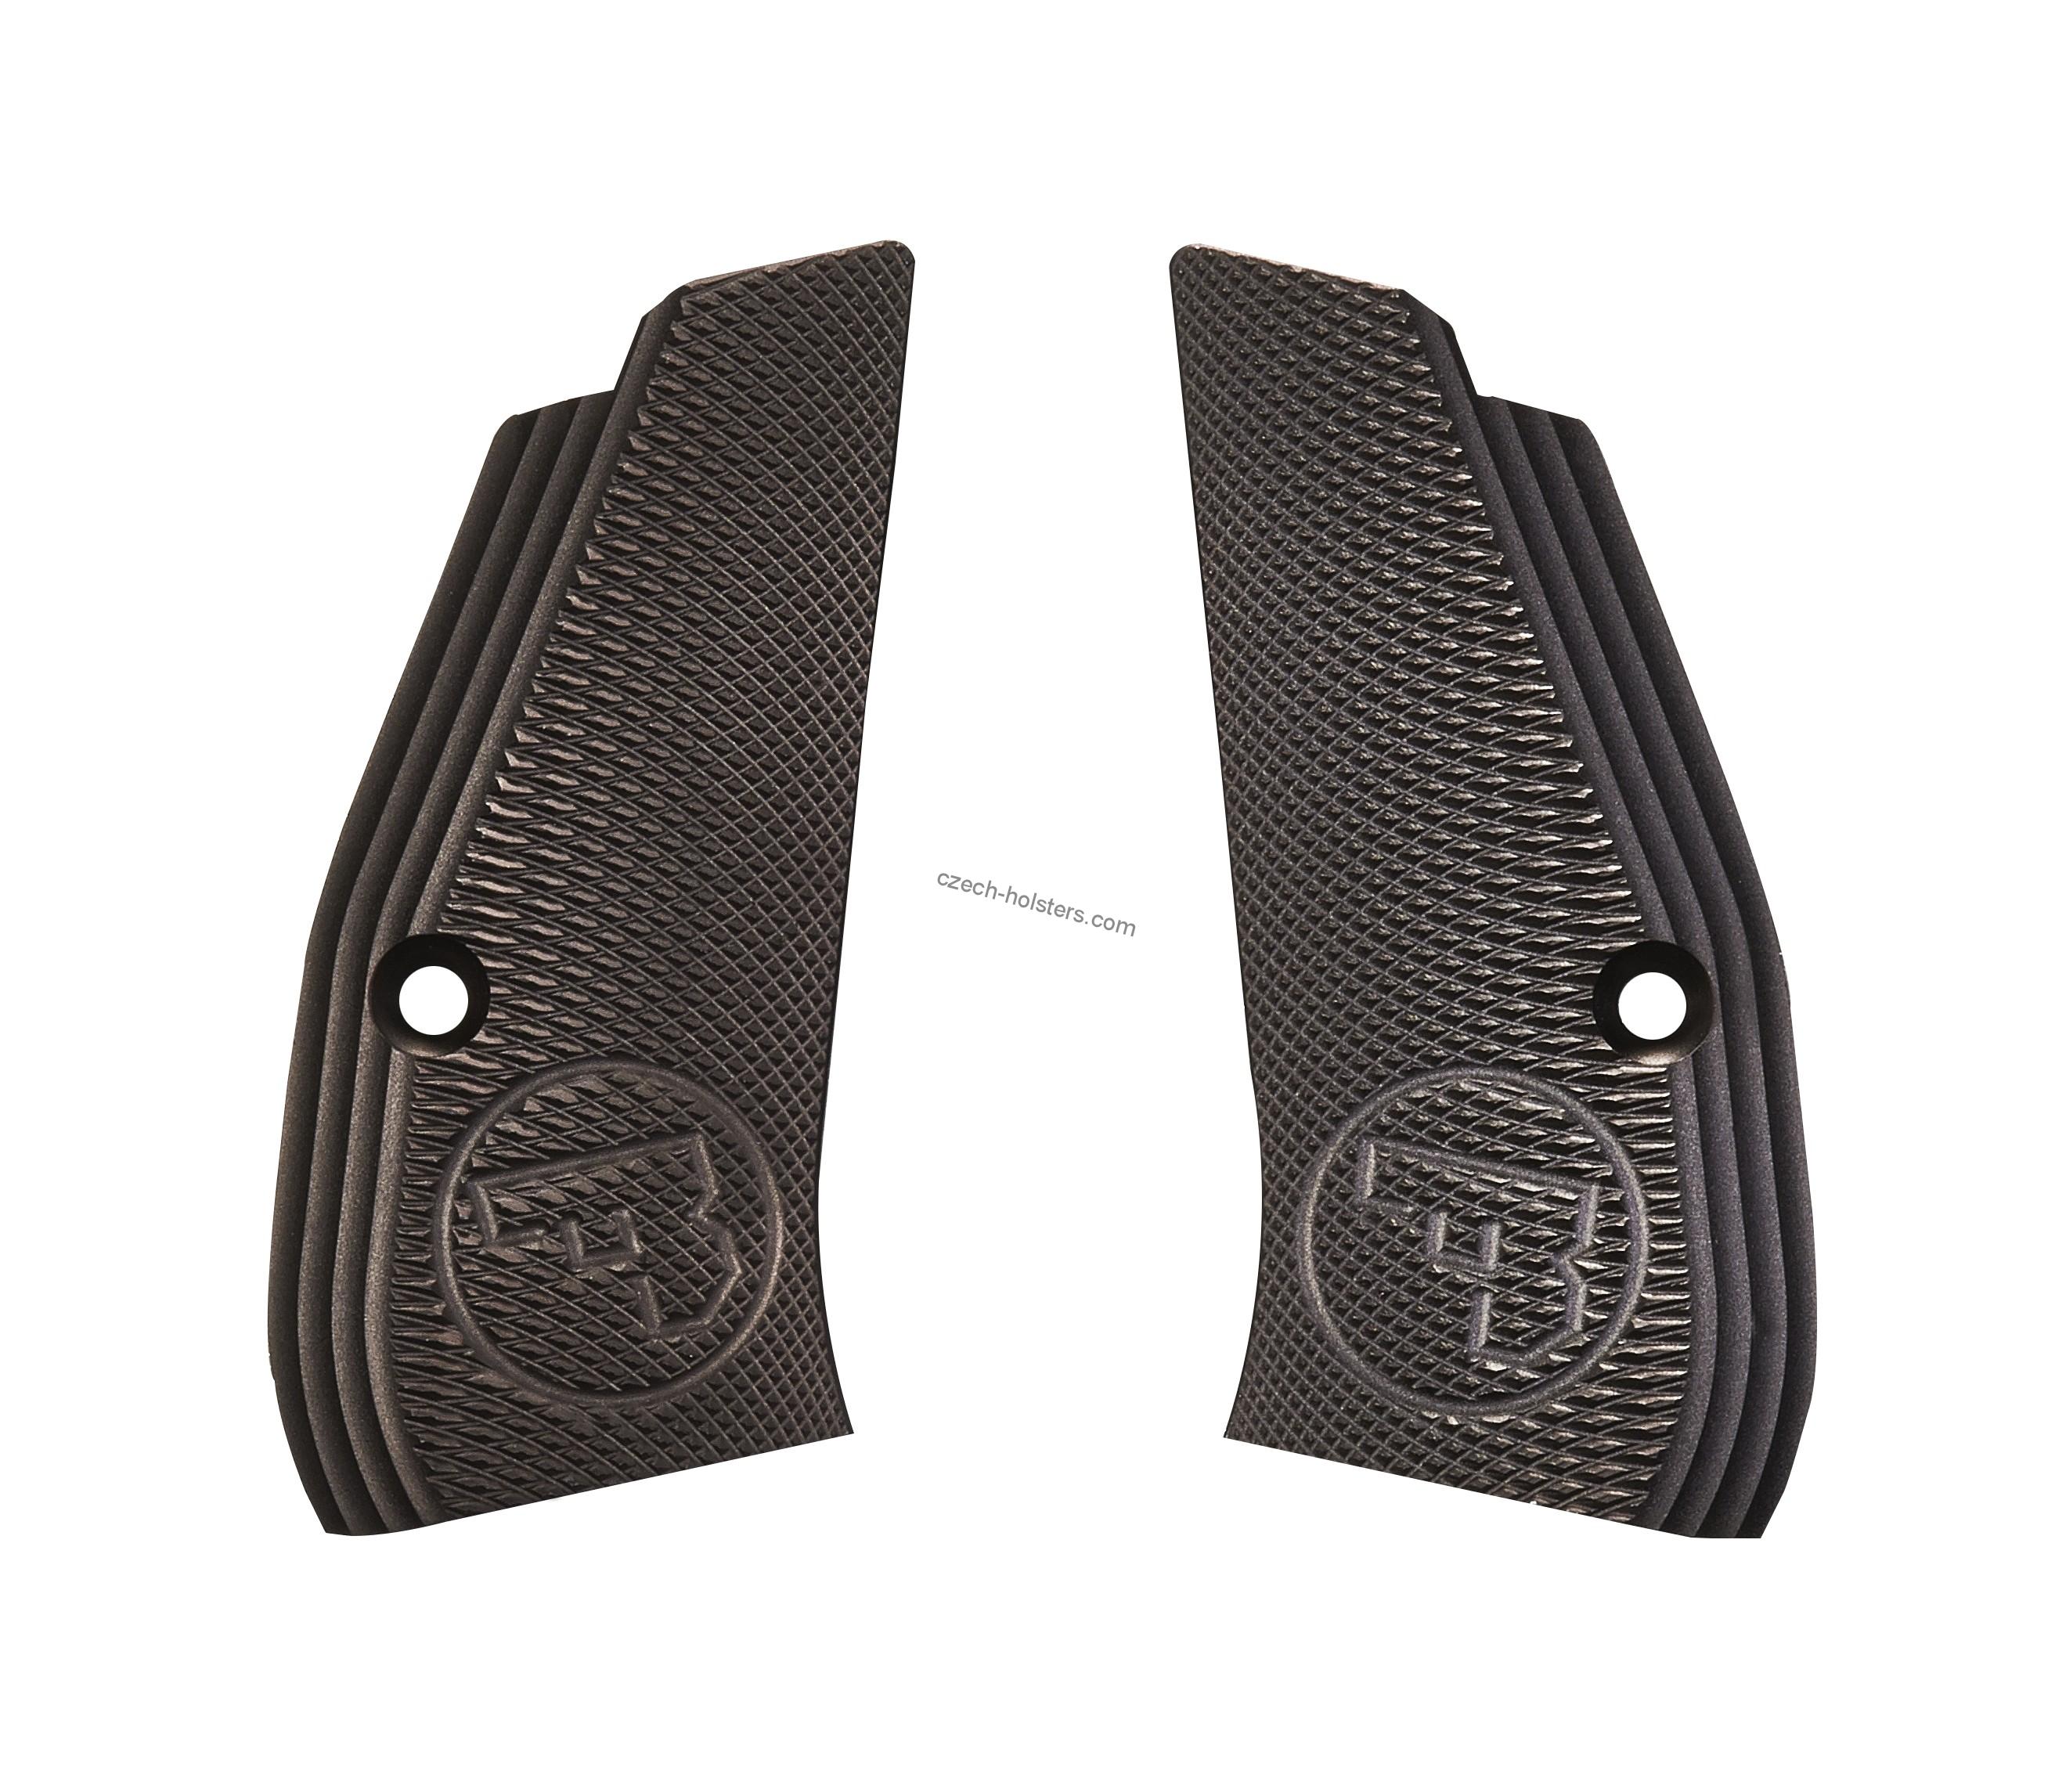 CZ 75 D Compact Grooved Grips without Funnel - Long Black - CZUB®